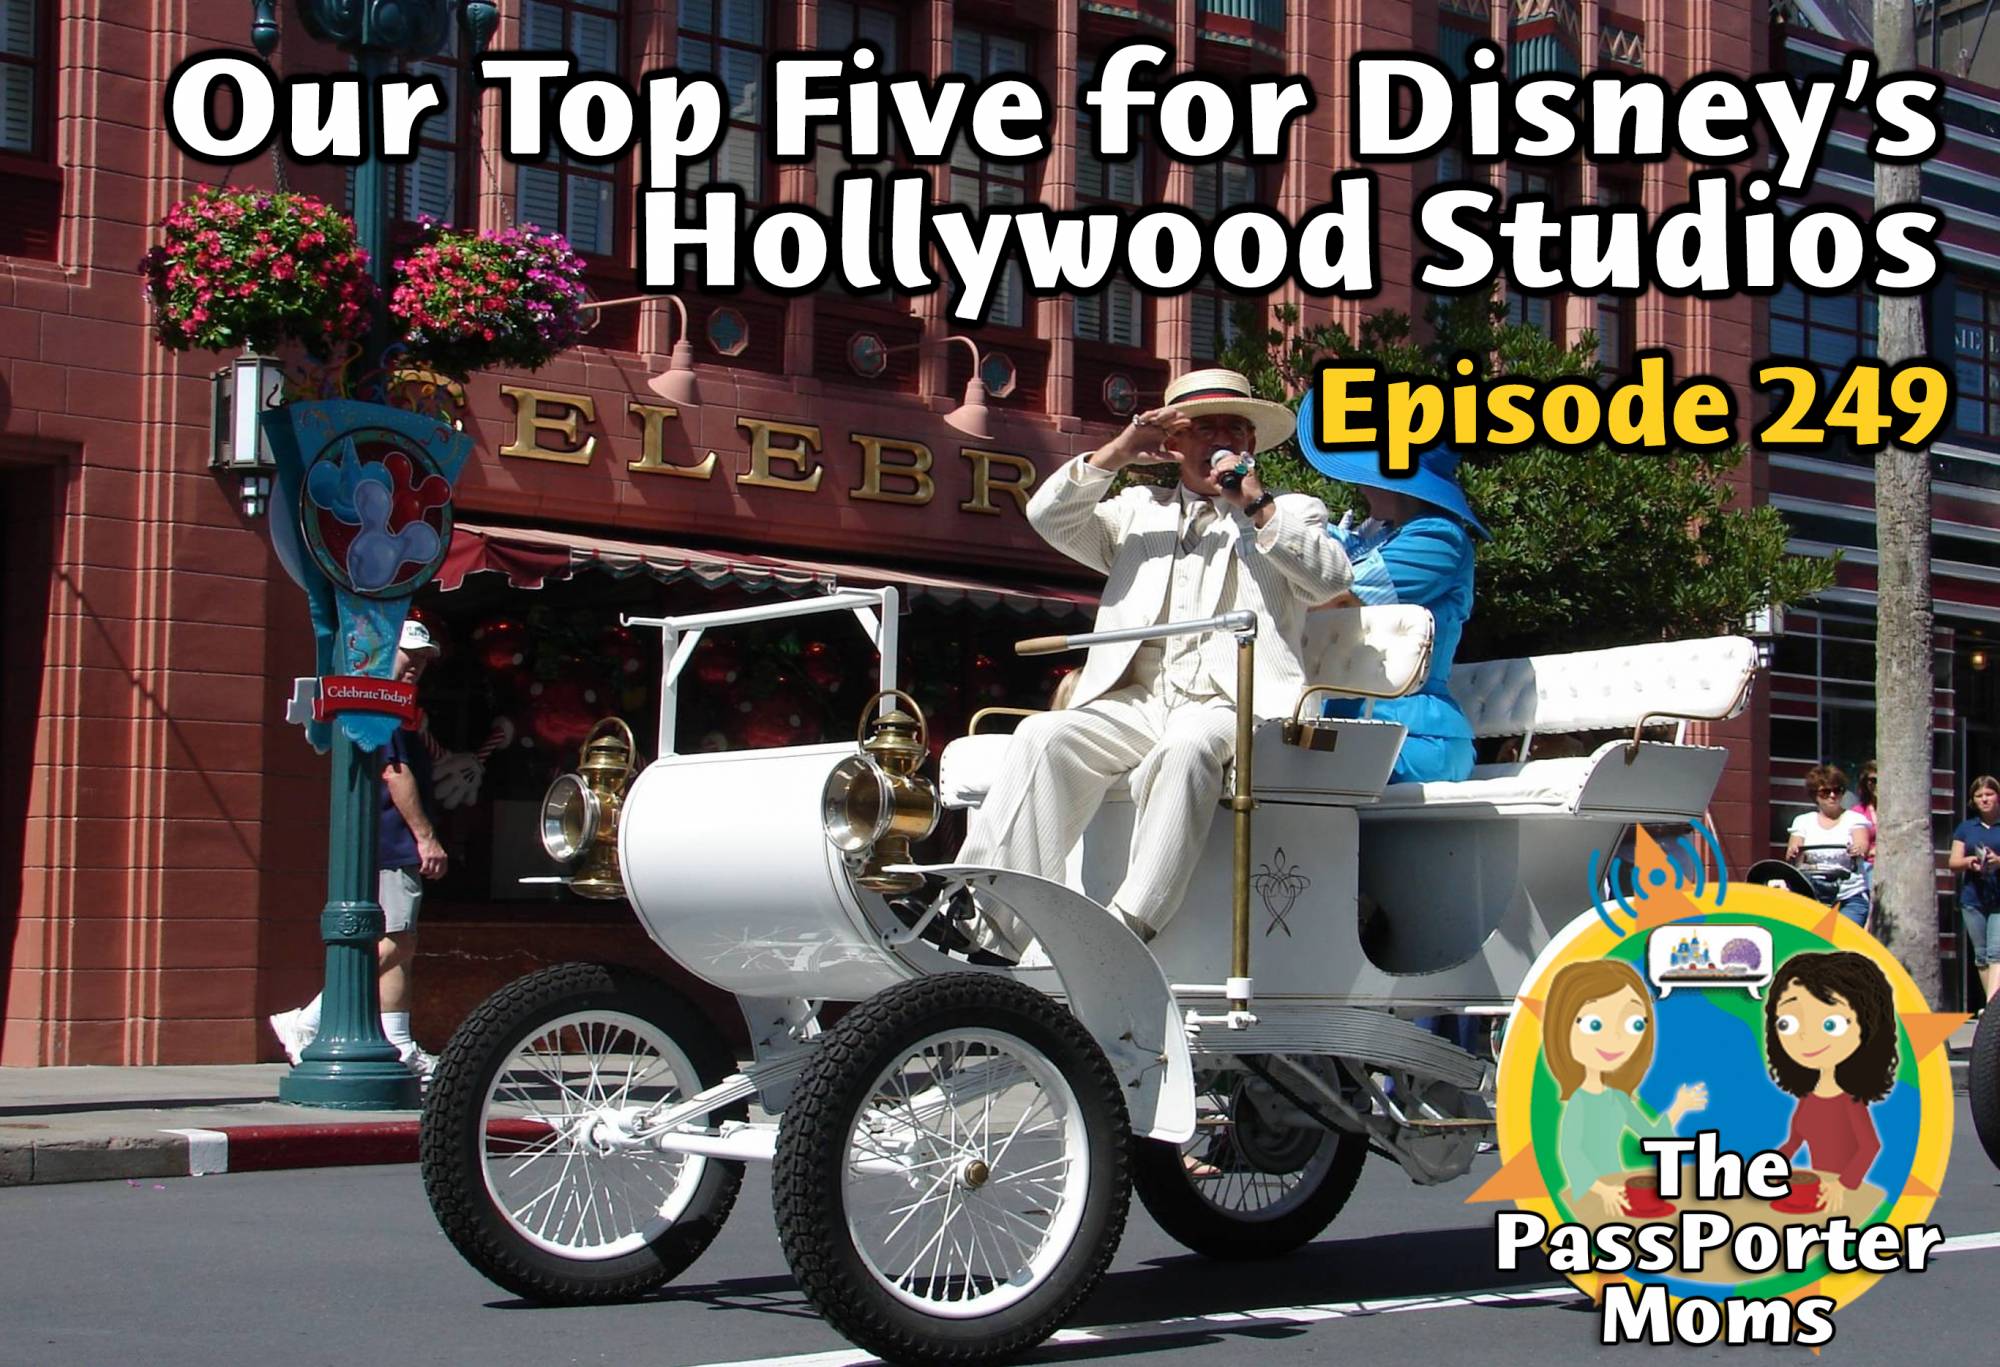 Our Top 5 for Hollywood Studios